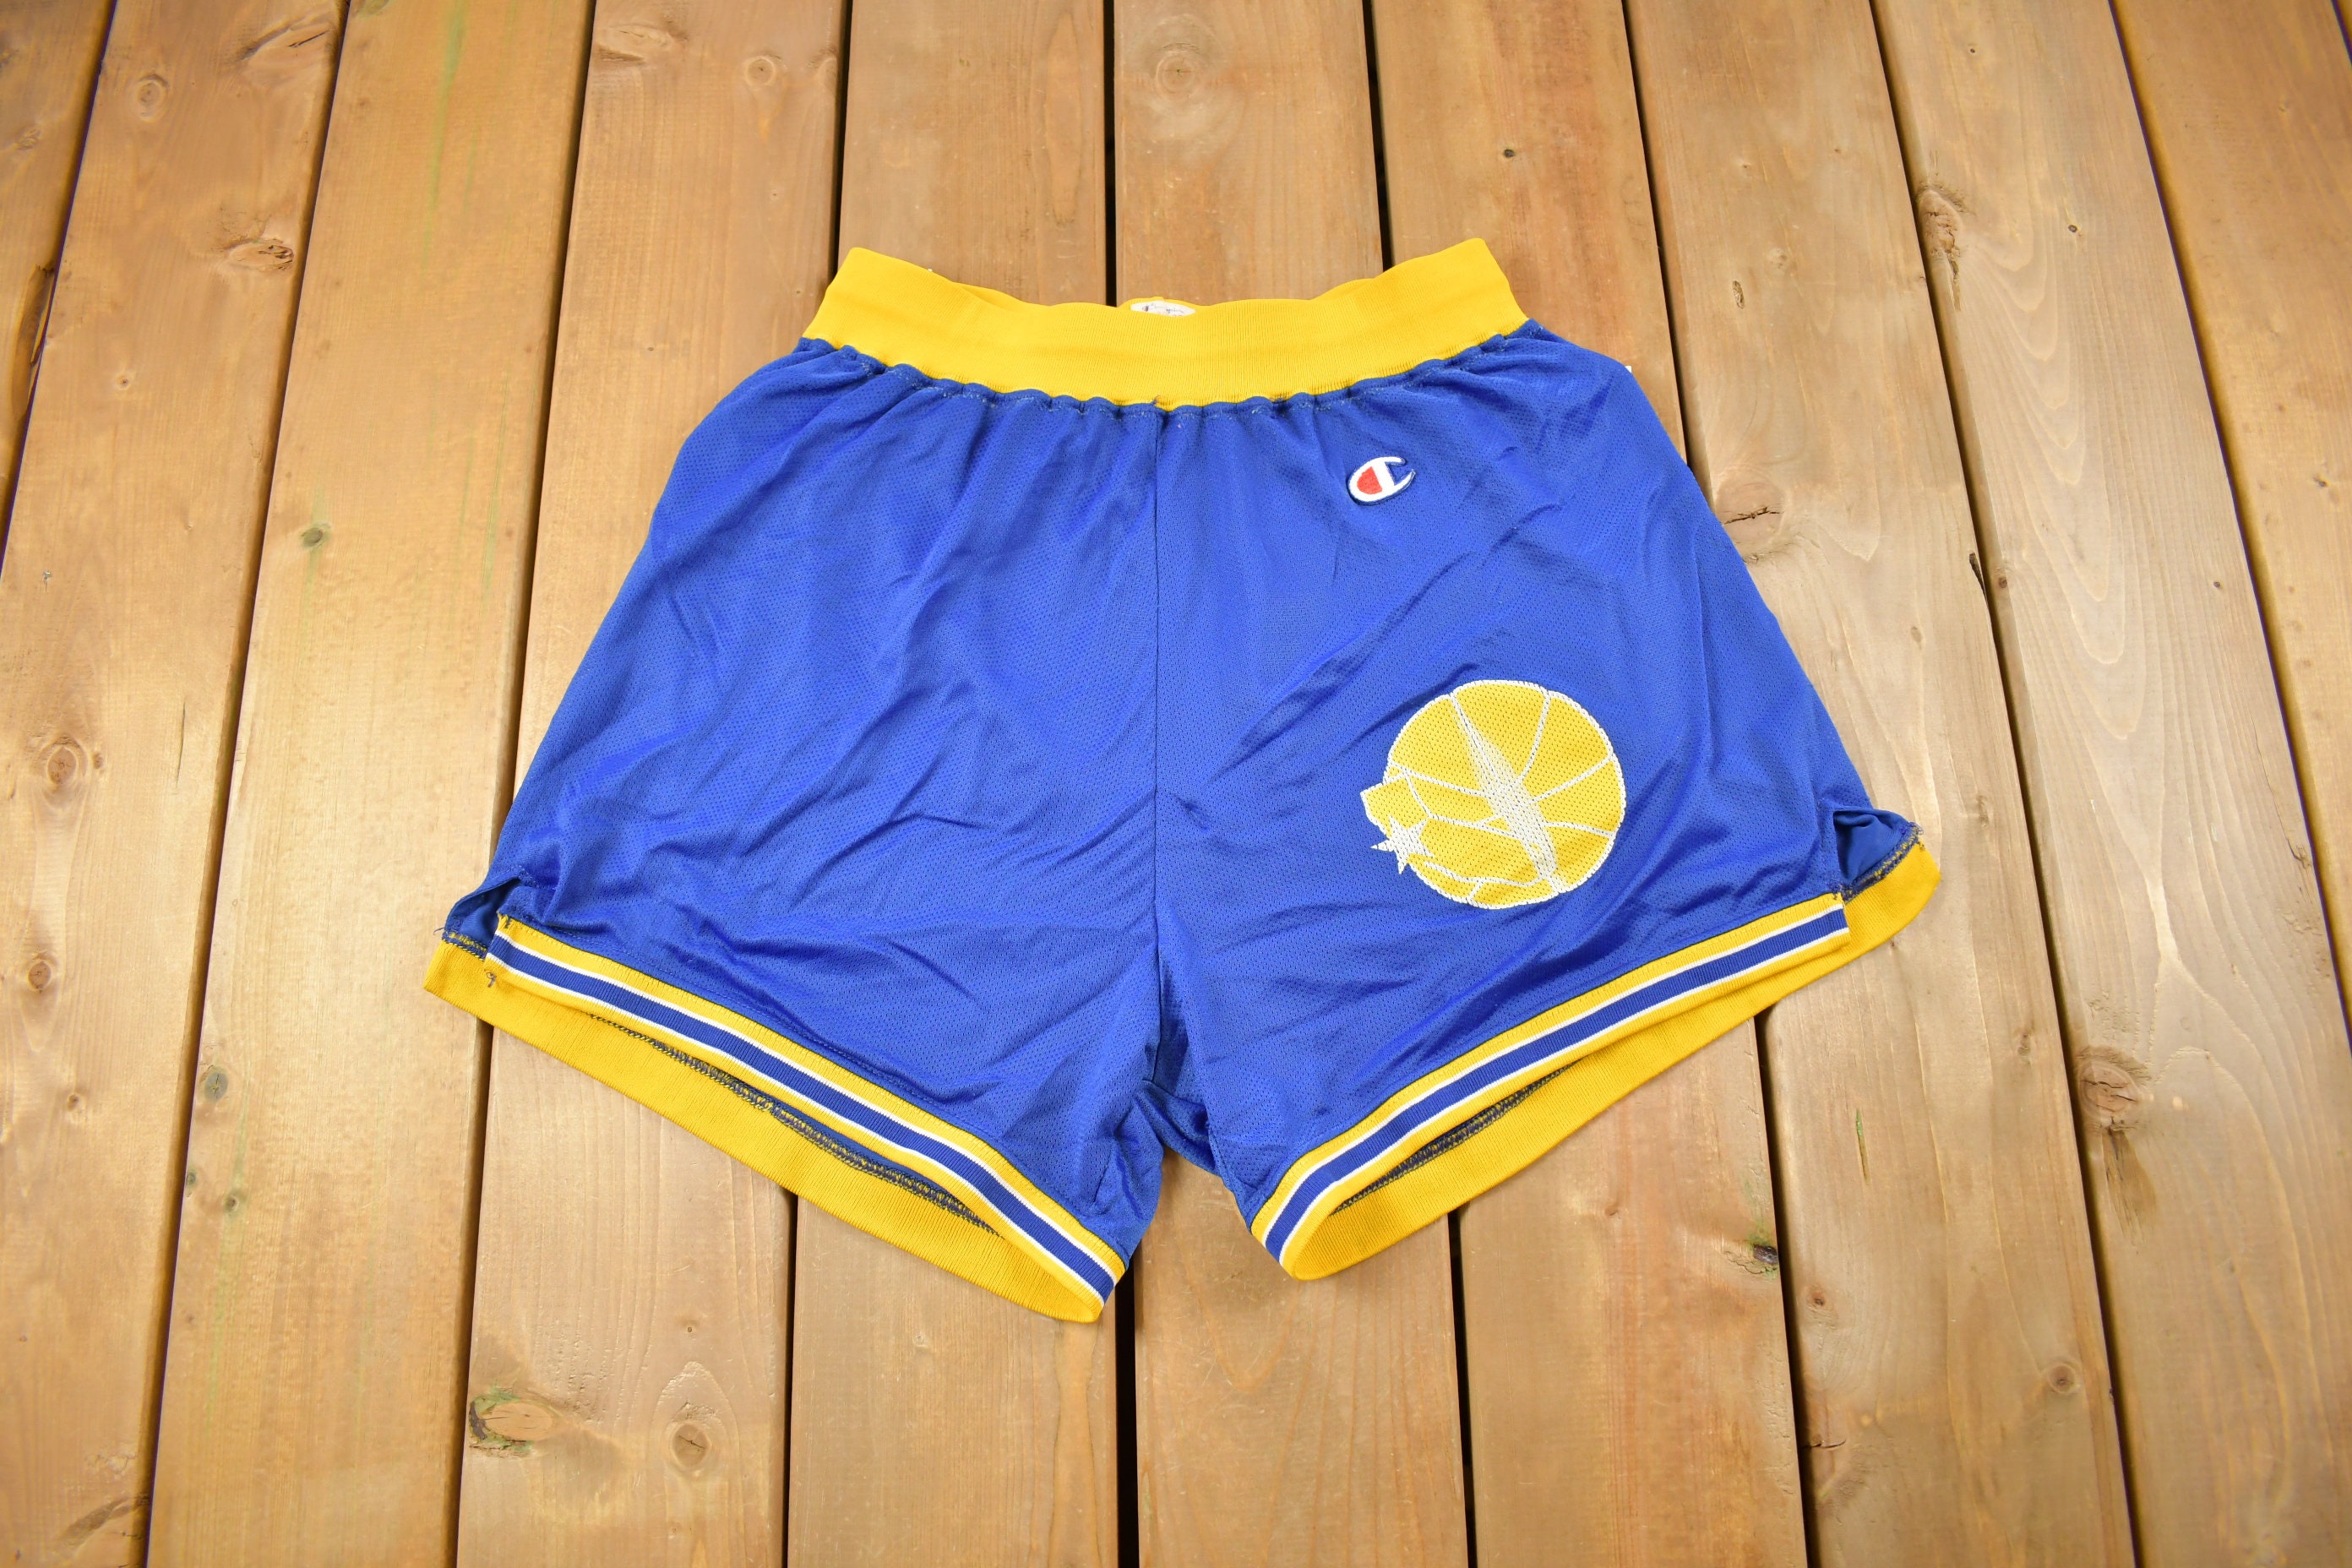 Mitchell & Ness ‘95-‘96 Golden State Warriors Authentic Shorts Sz Large